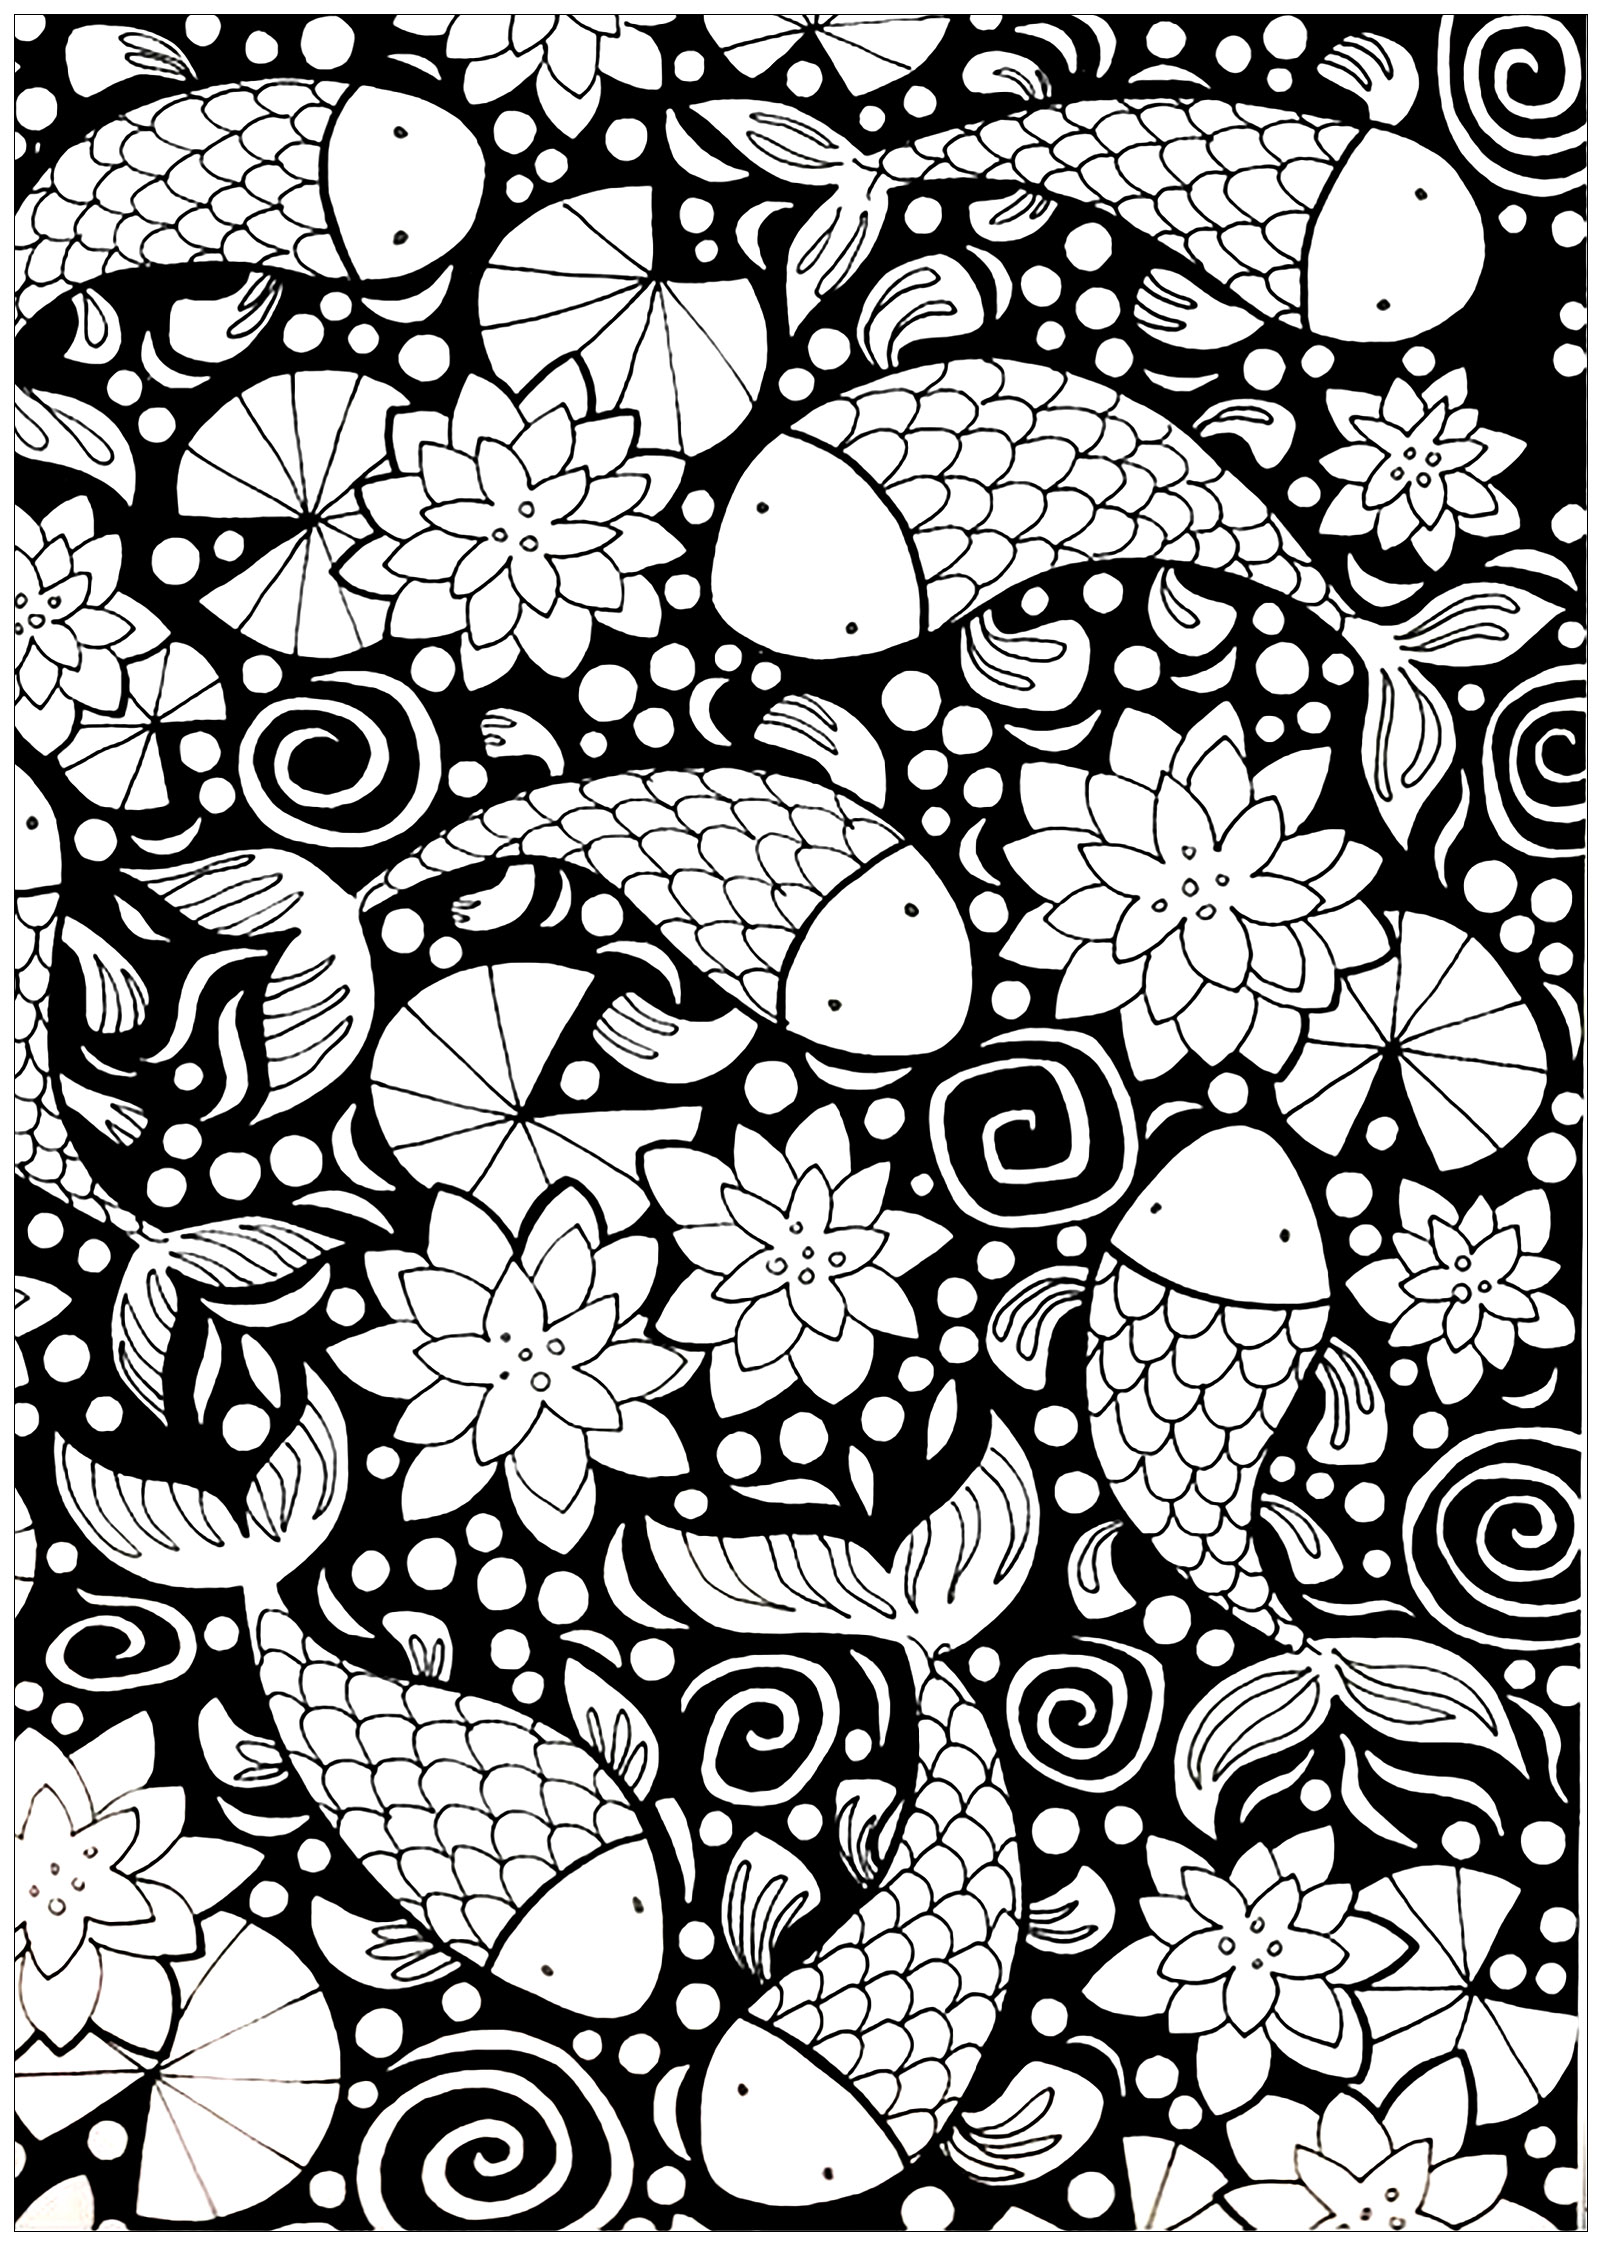 Fishes with dark background - Fishes Adult Coloring Pages